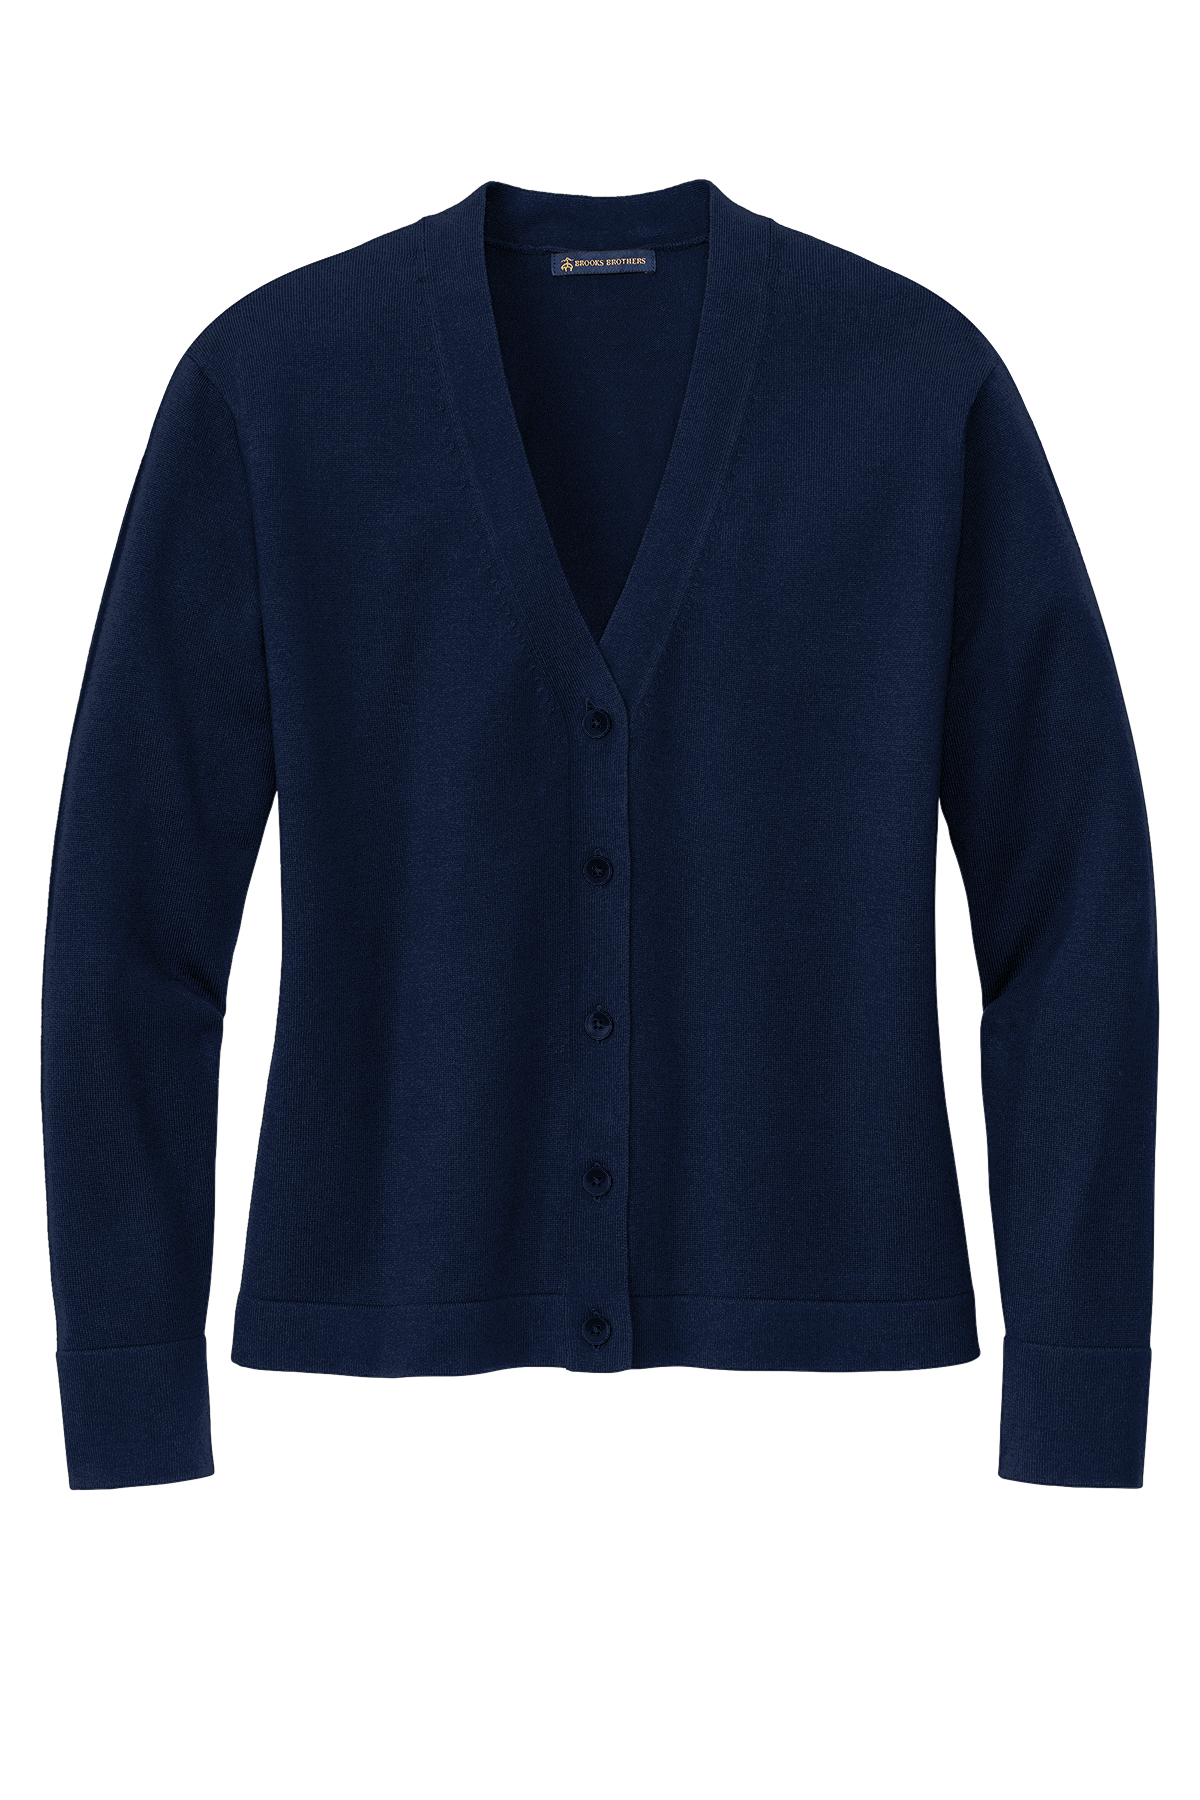 Brooks Brothers Women's Cotton Stretch Cardigan Sweater | Product | SanMar